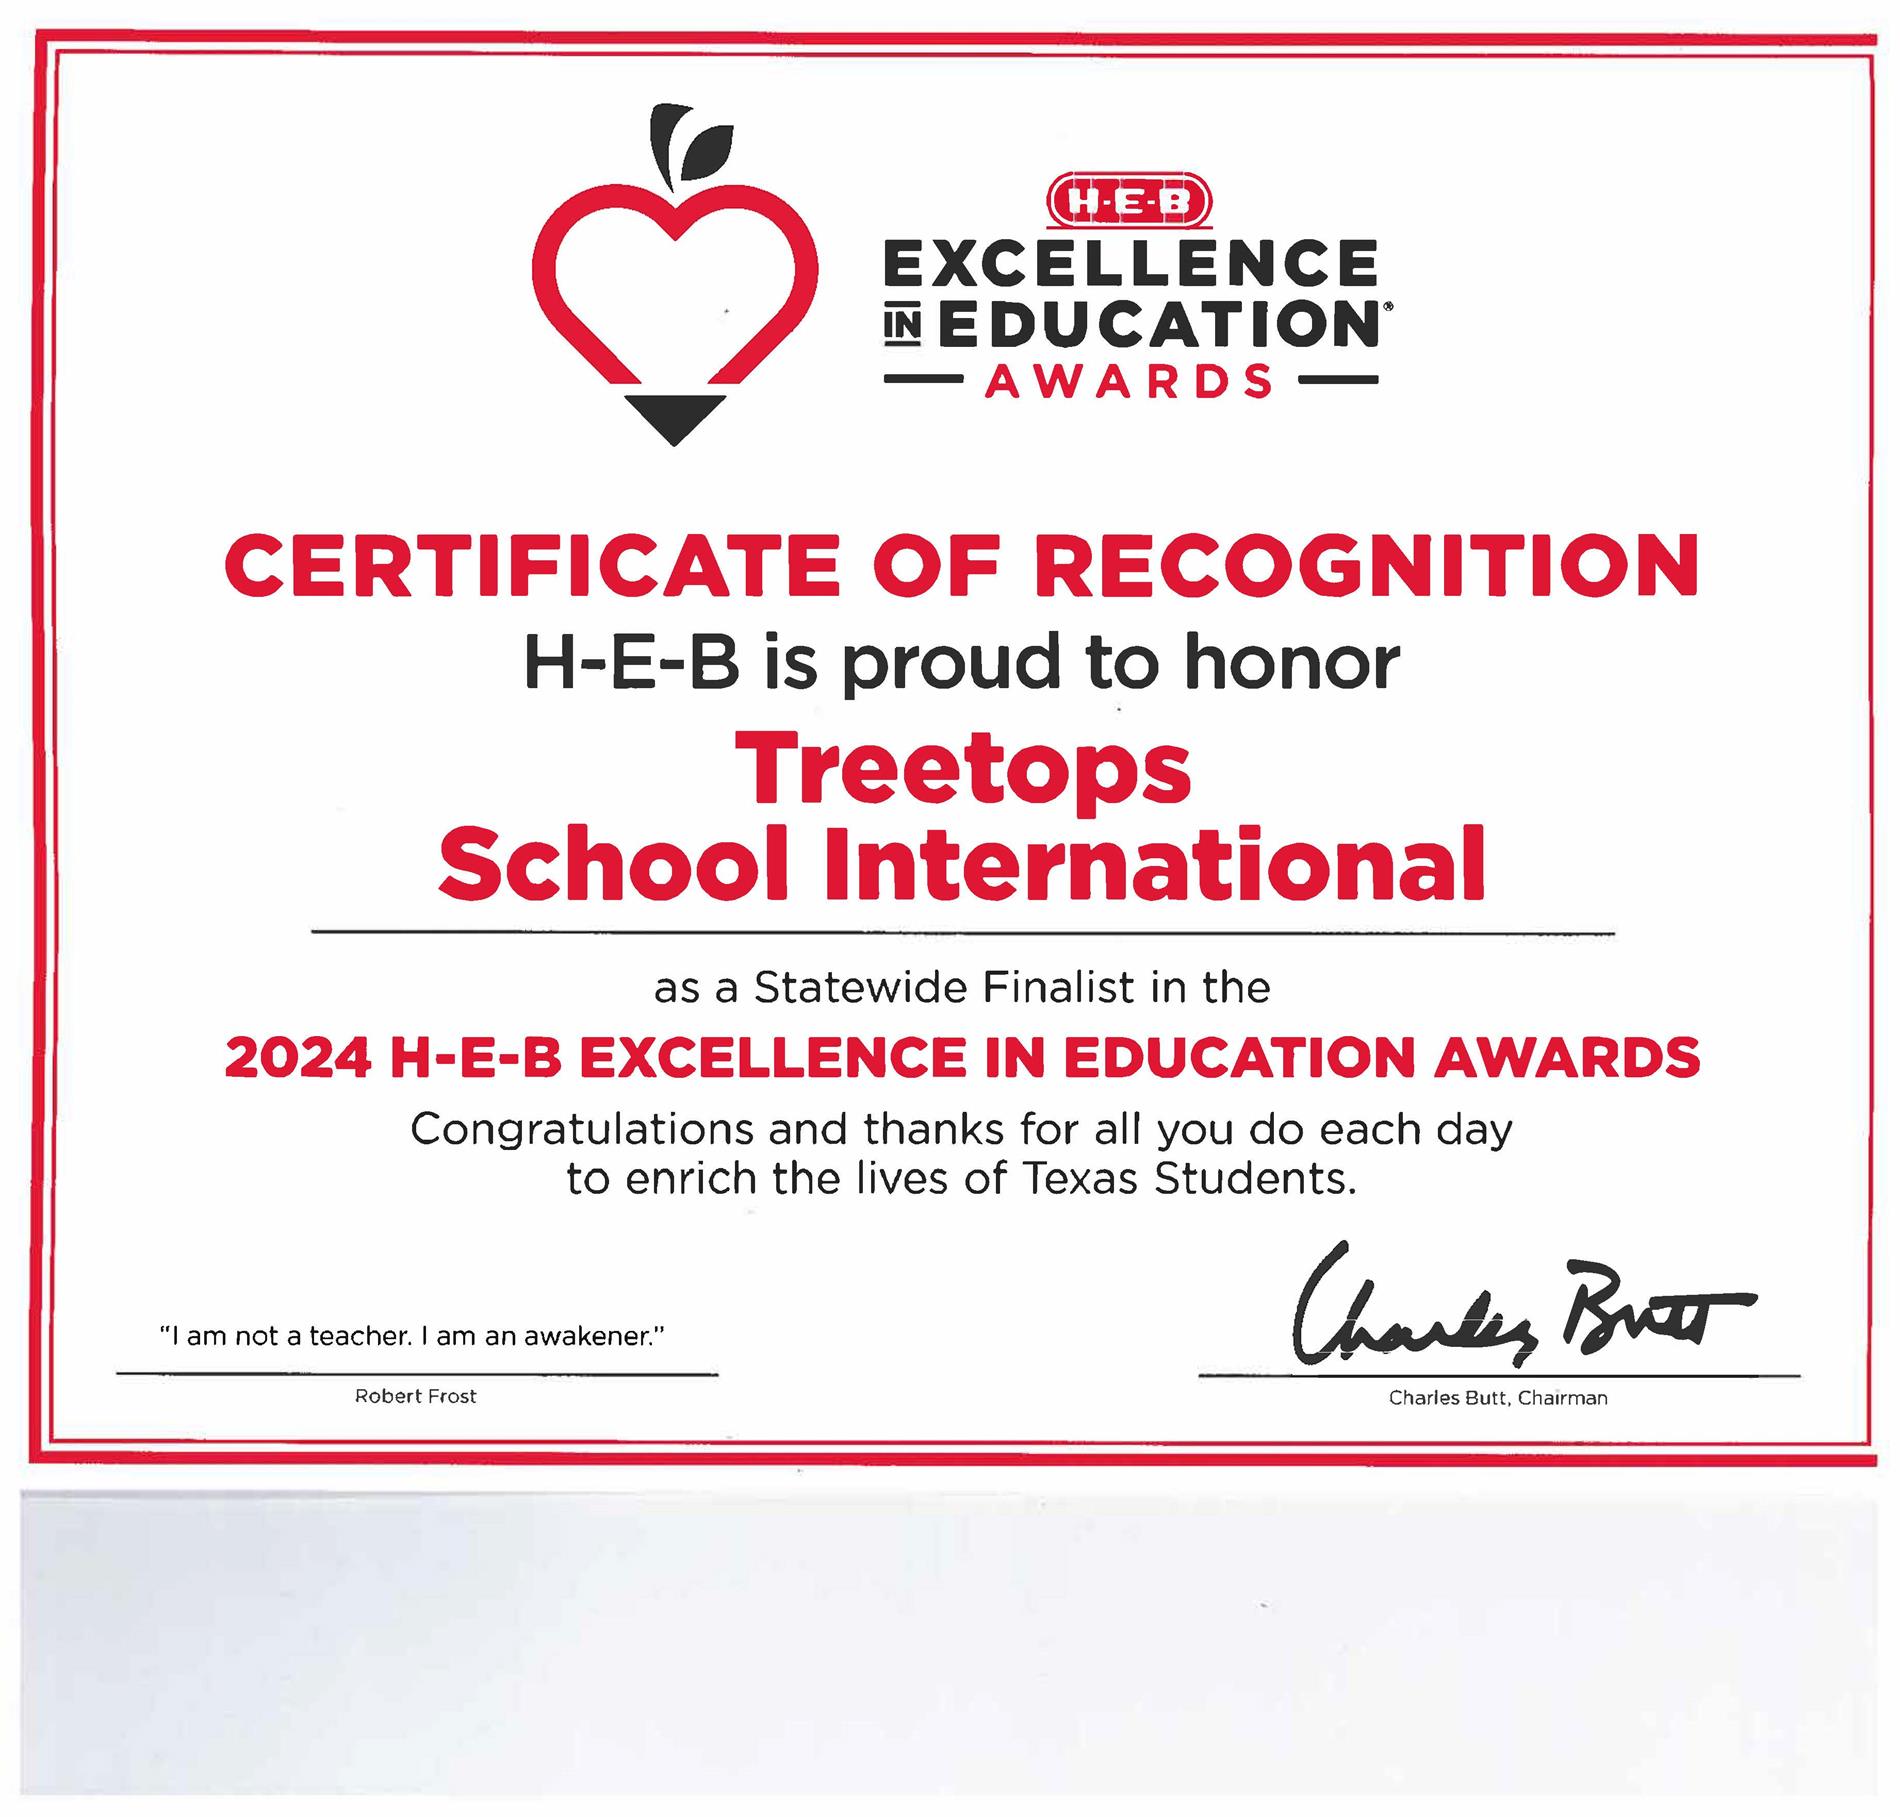 HEB Excellence in Education